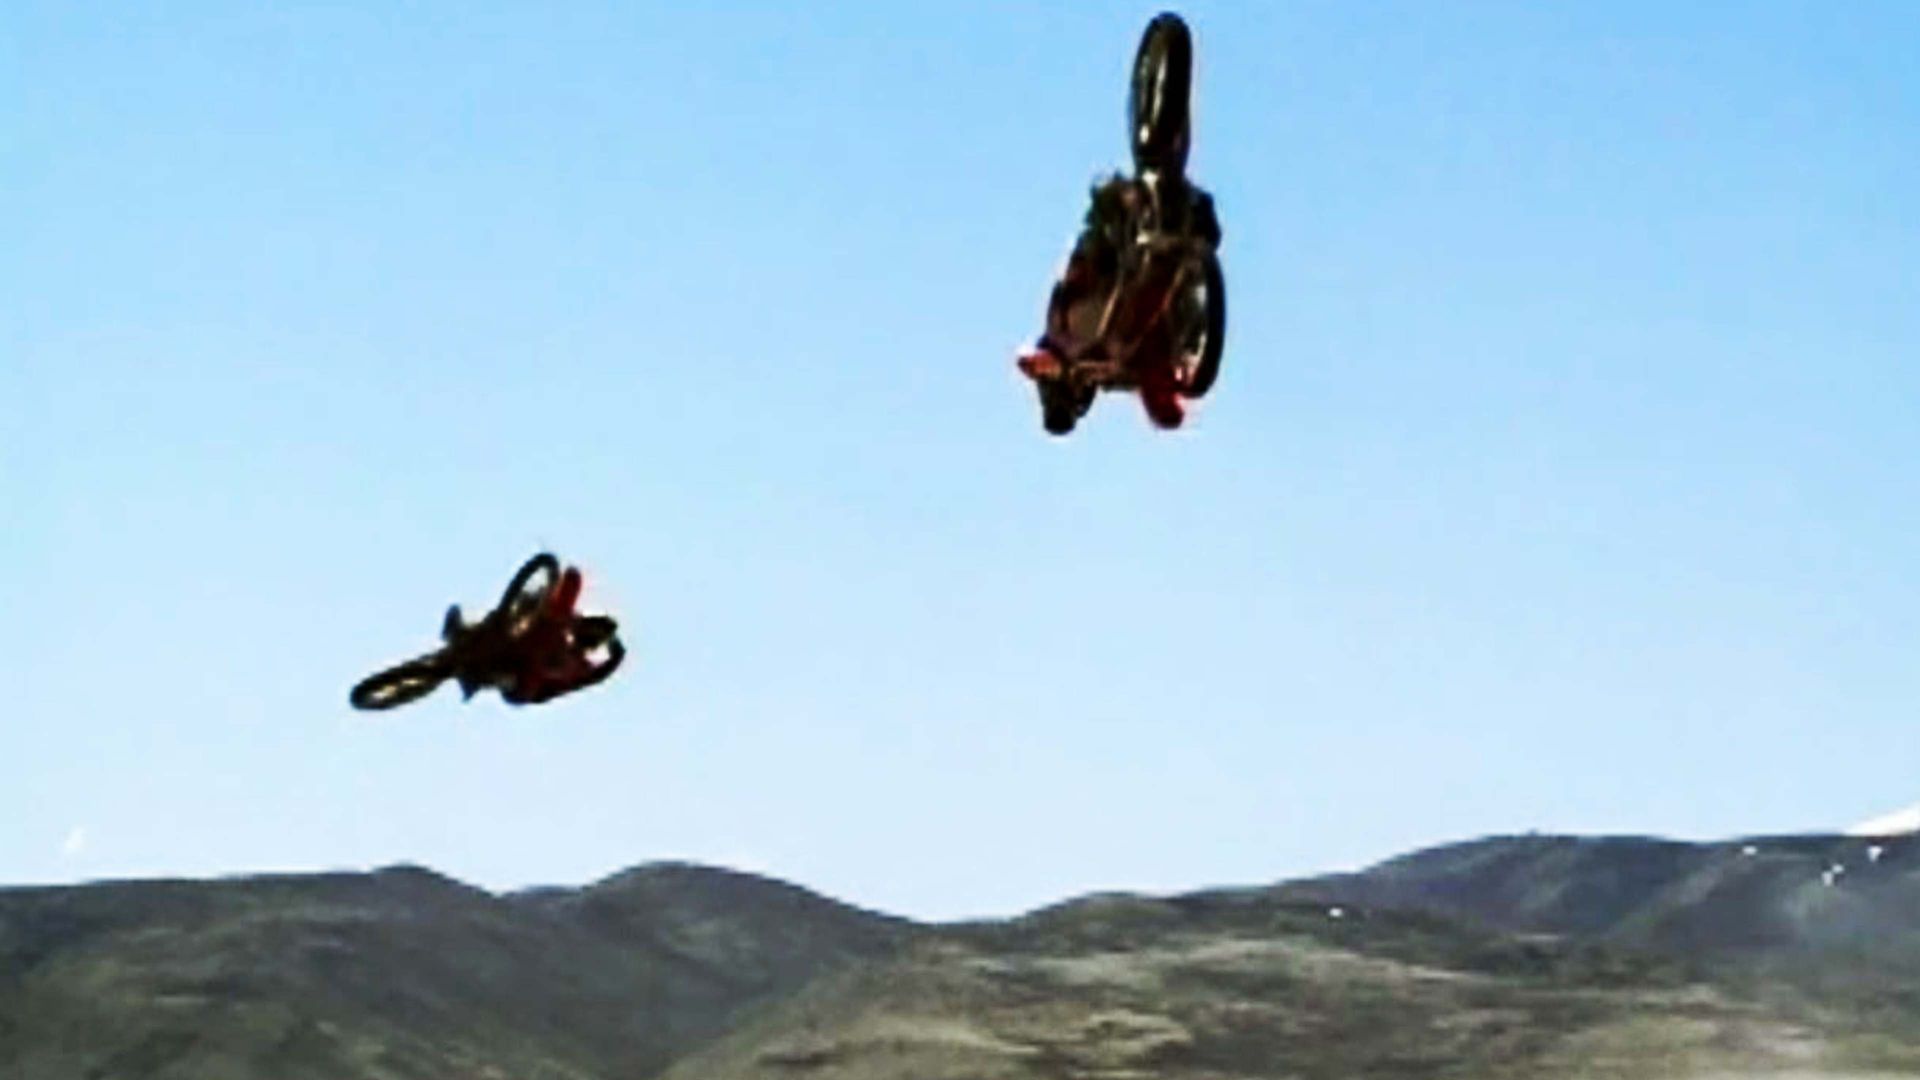 Travis and the Nitro Circus 2 background